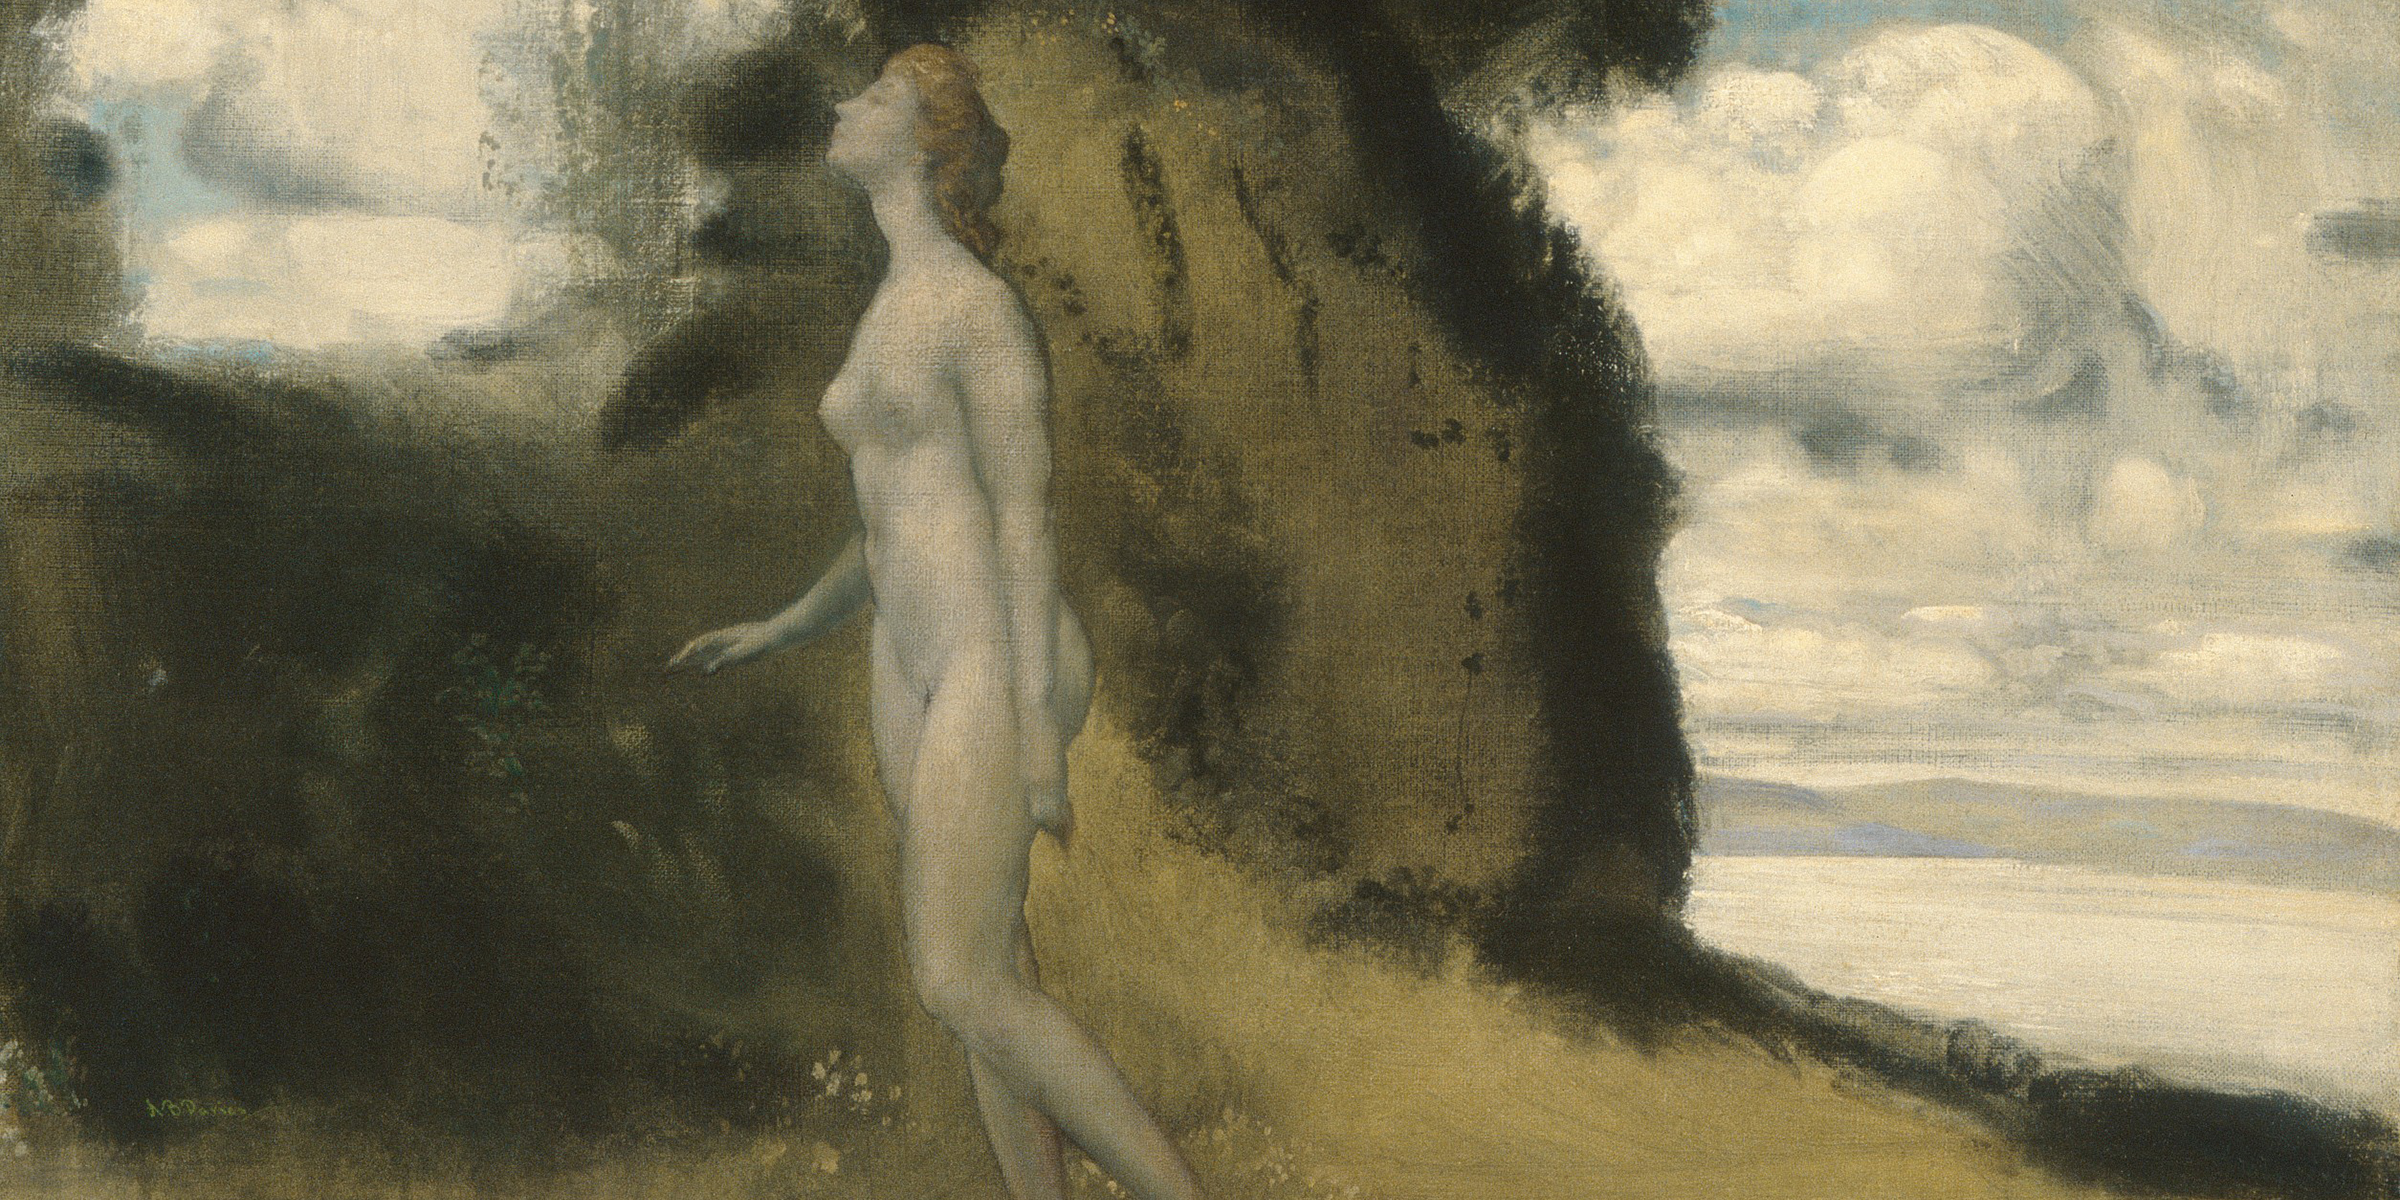 A Measure of Dreams (detail), by Arthur B. Davies, c. 1908. The Metropolitan Museum of Art, Gift of George A. Hearn, 1909.